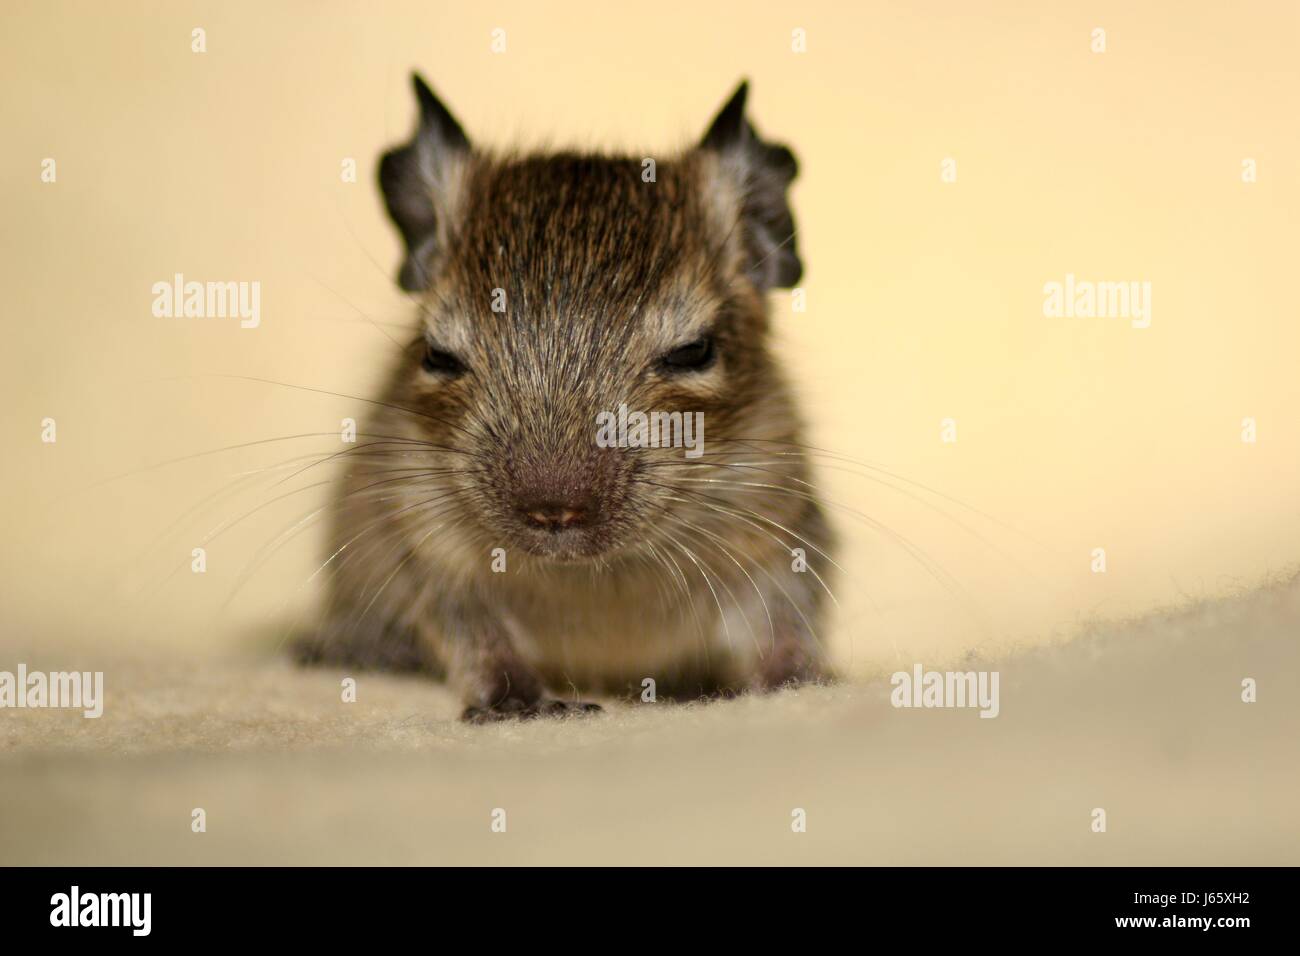 rodent animal child young younger head macro close-up macro admission close up Stock Photo